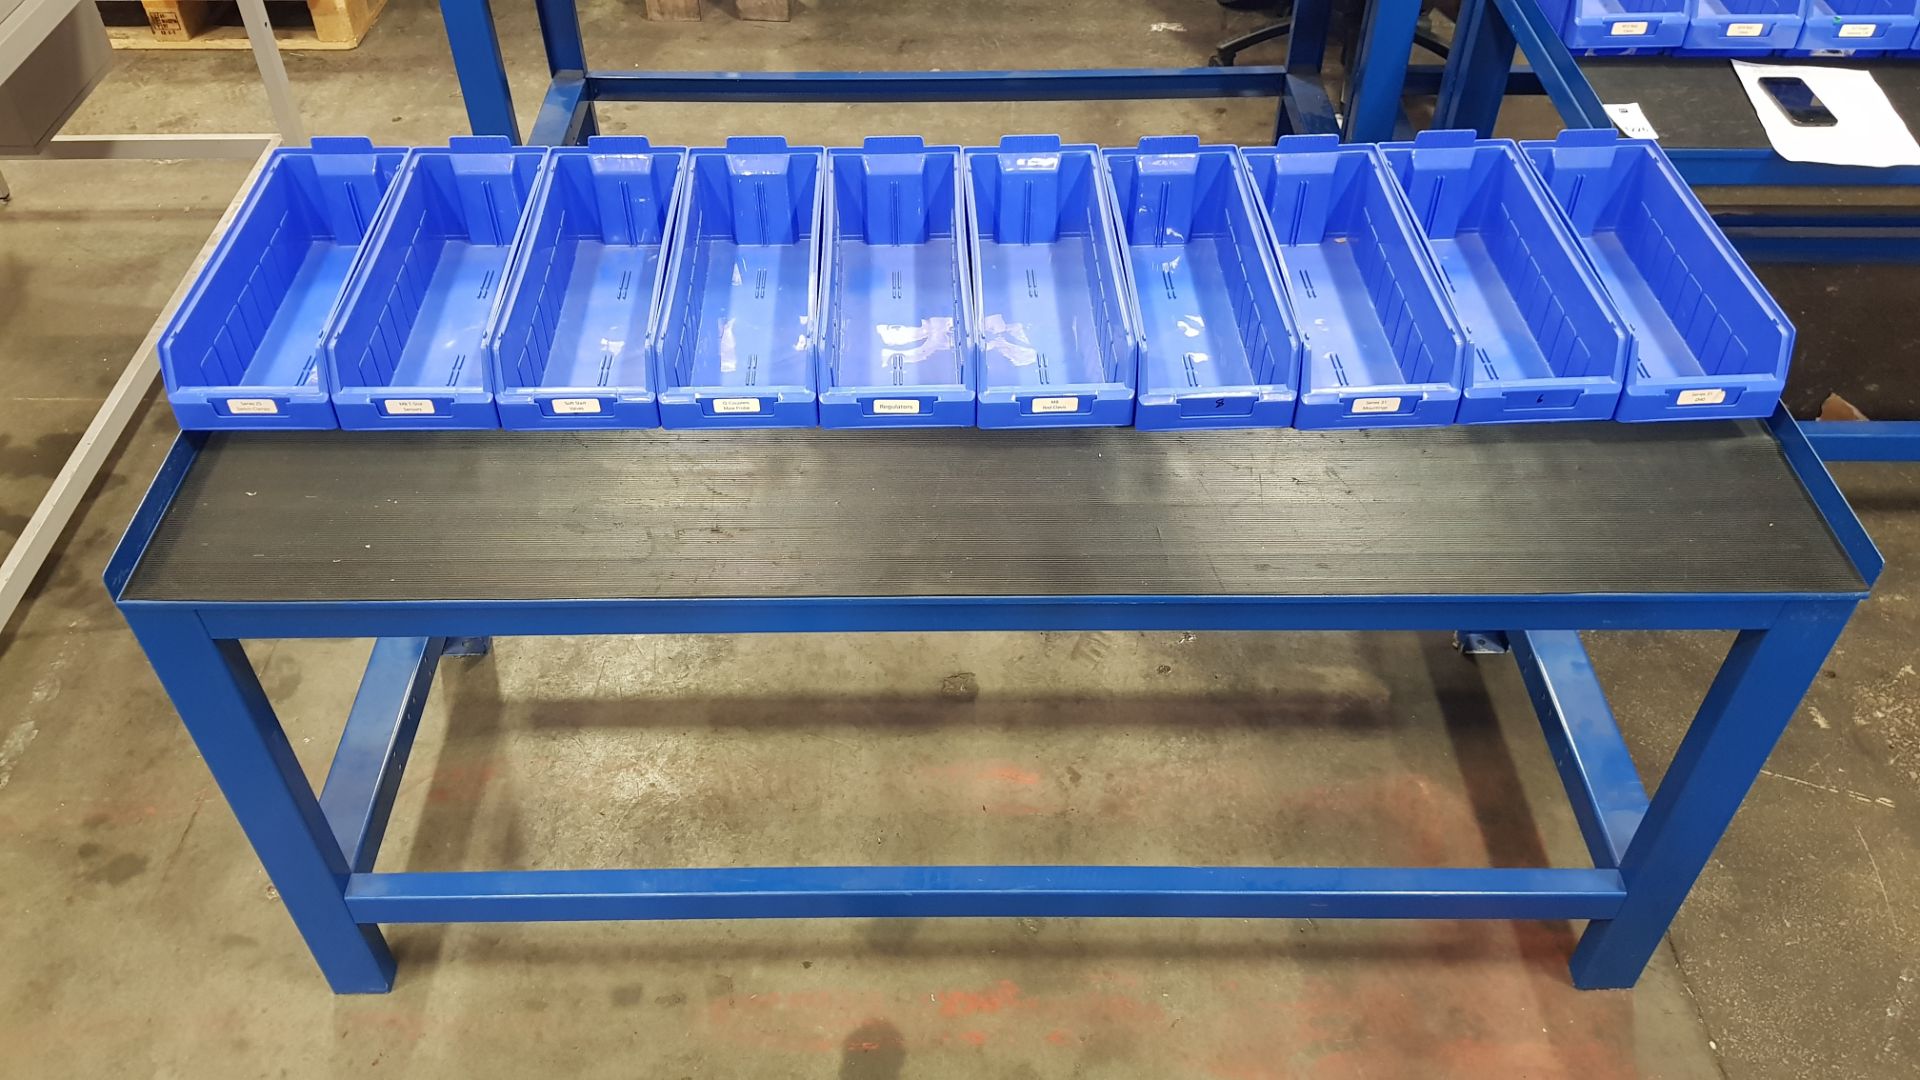 1 X INDUSTRIAL WORK BENCH. COMES WITH 10 BLUE TRAYS. OVERALL DIMENSIONS 180x66x80cm